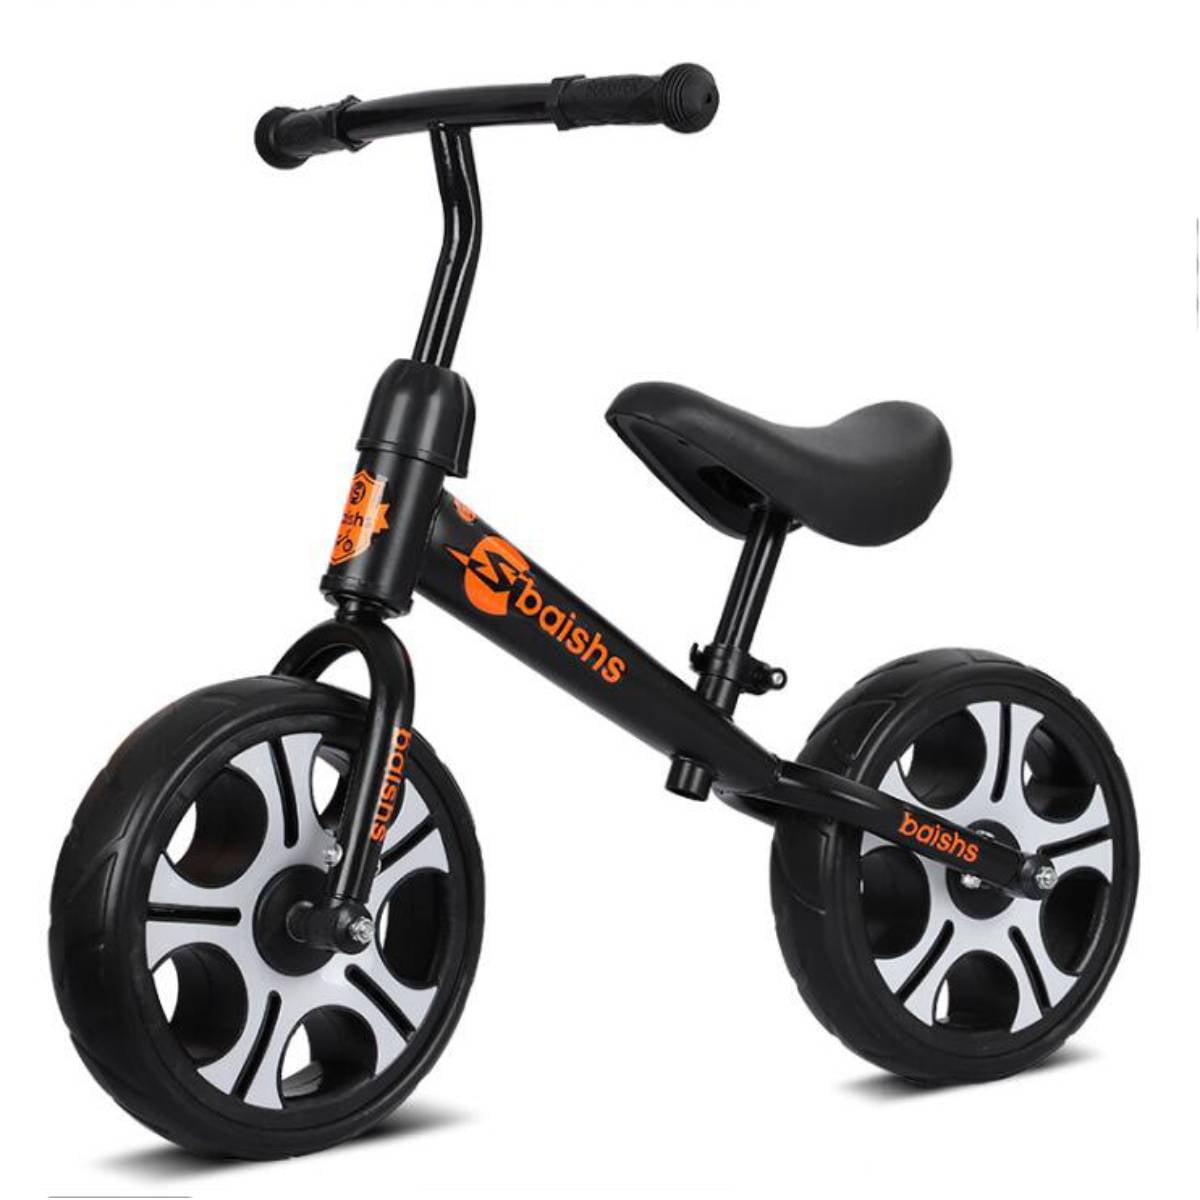 HOMCOM 12 Balance Bike No Pedal Walking Balance Training Bicycle W/ Rubber Tires Adjustable Seat Height for Kids and Toddlers 2 to 5 Years Black